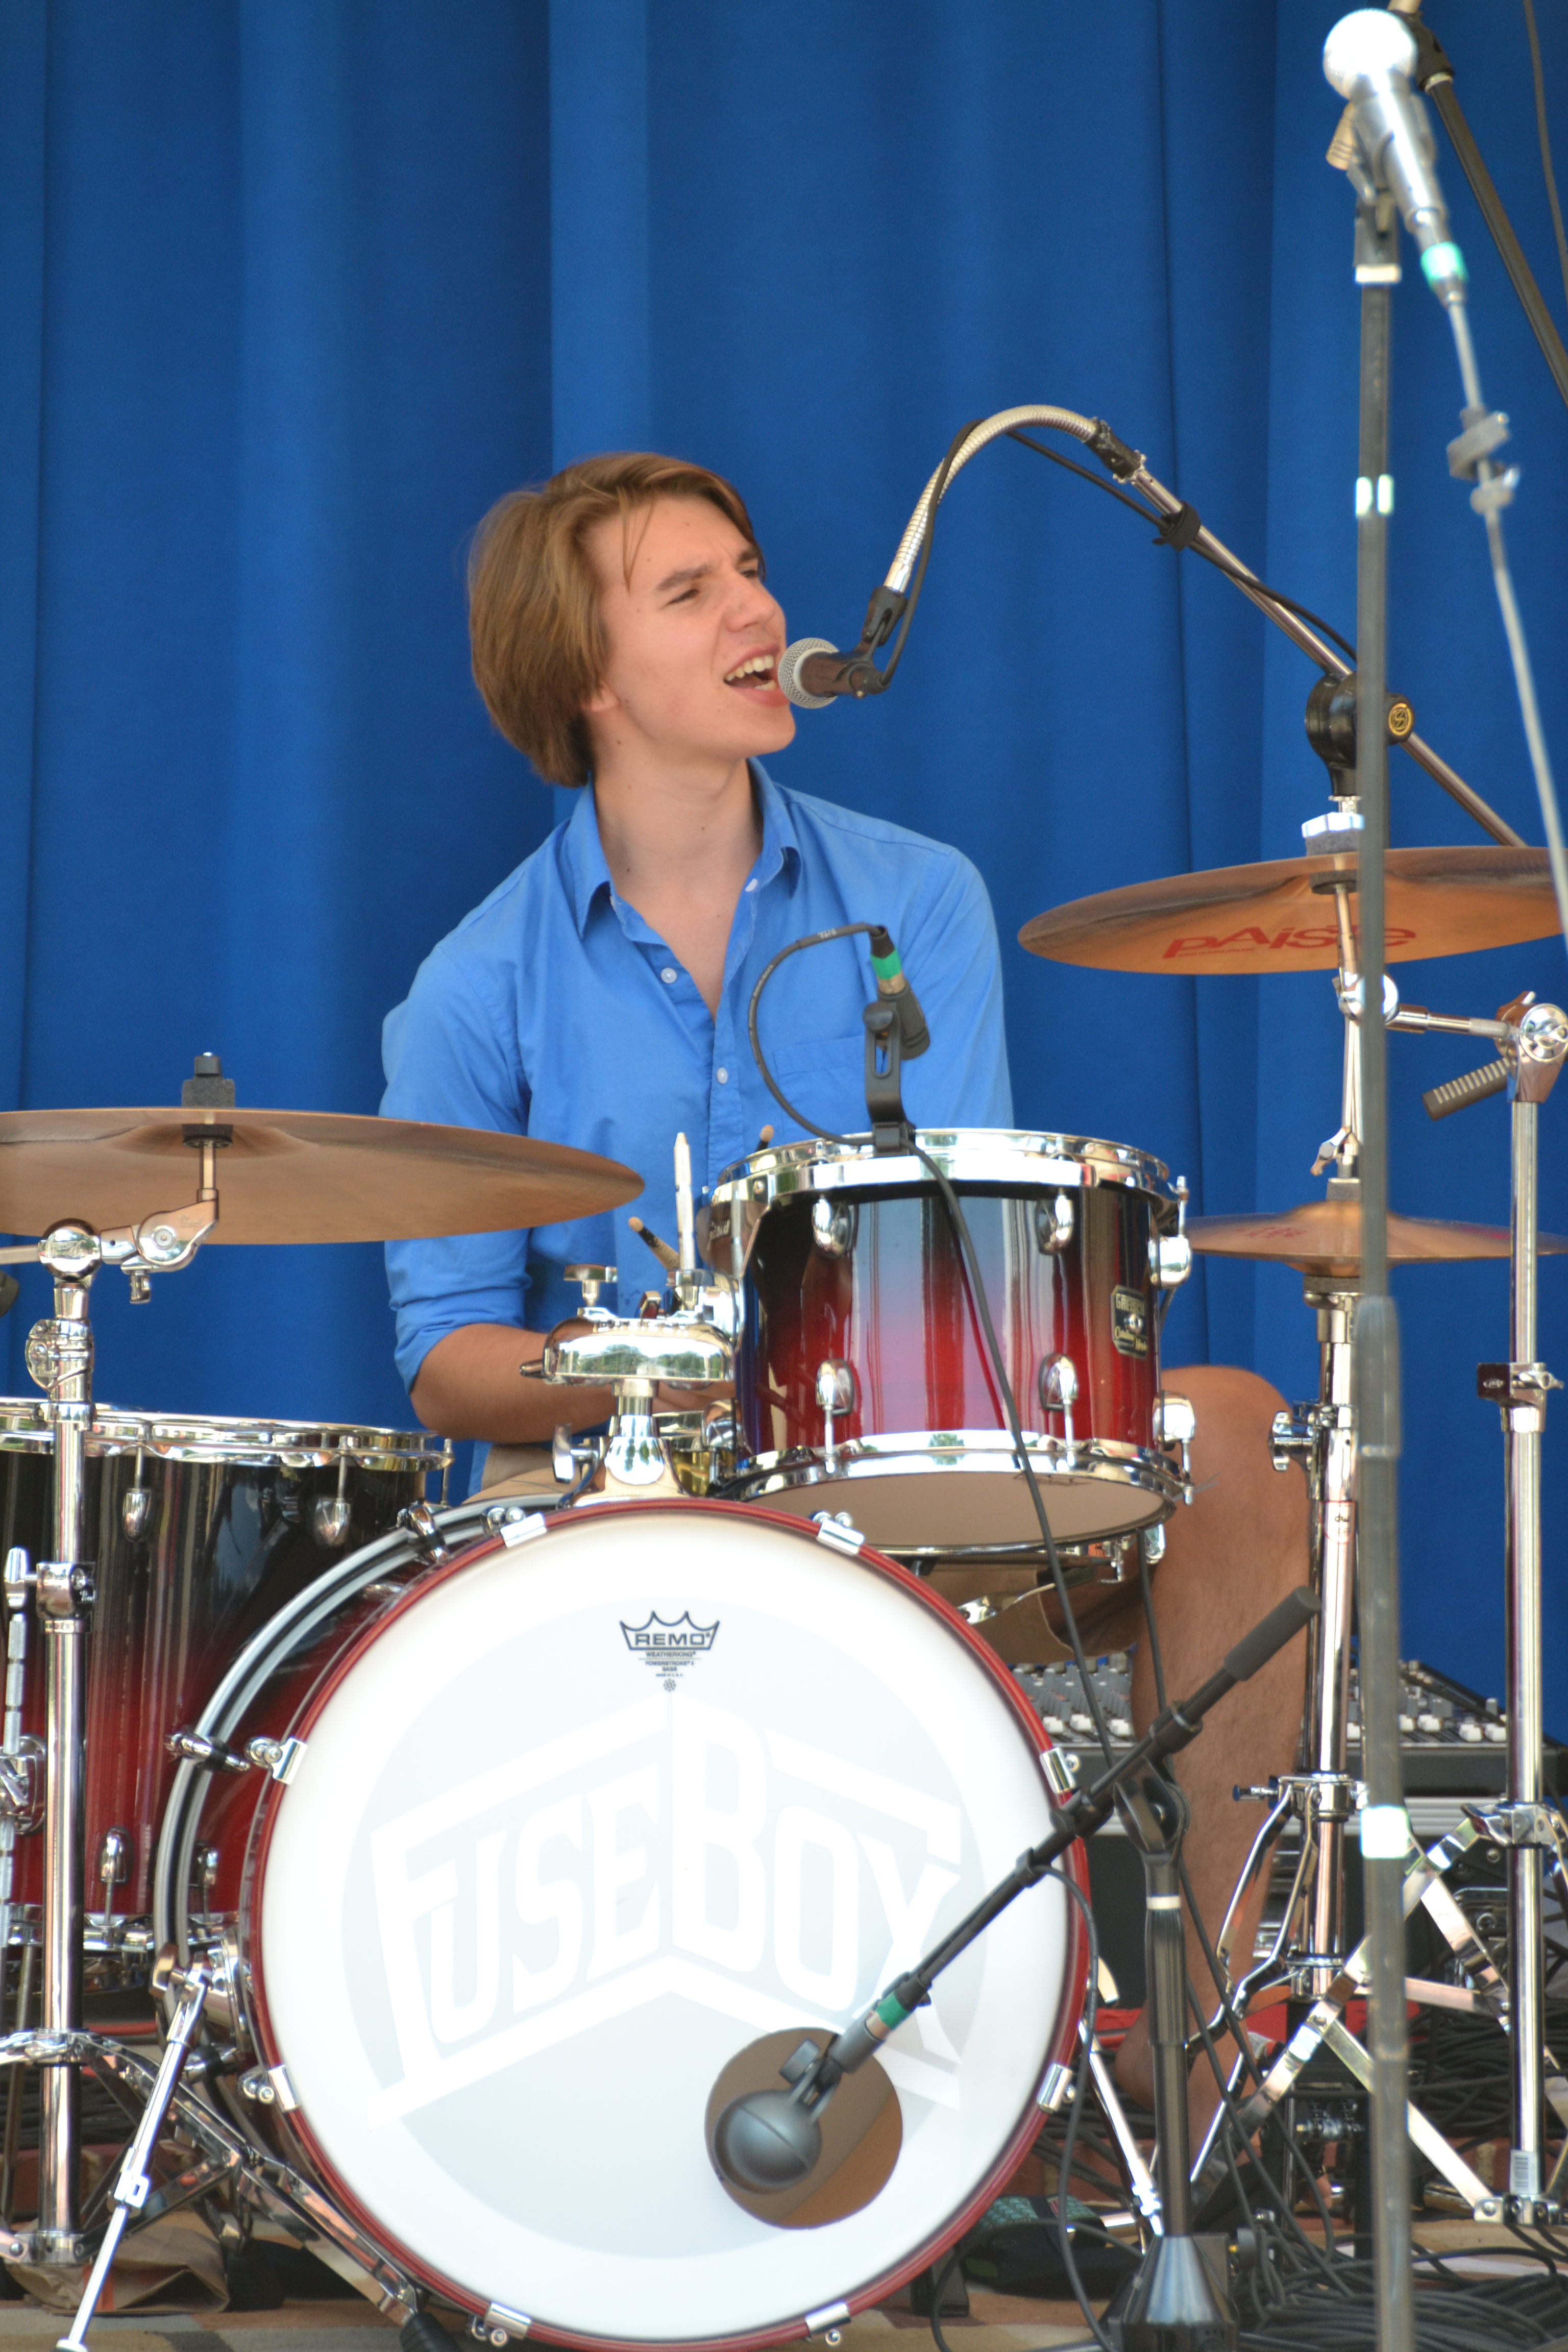 Fuse Box lead singer and drummer Kent Jenkins at the Pentagon's 2014 